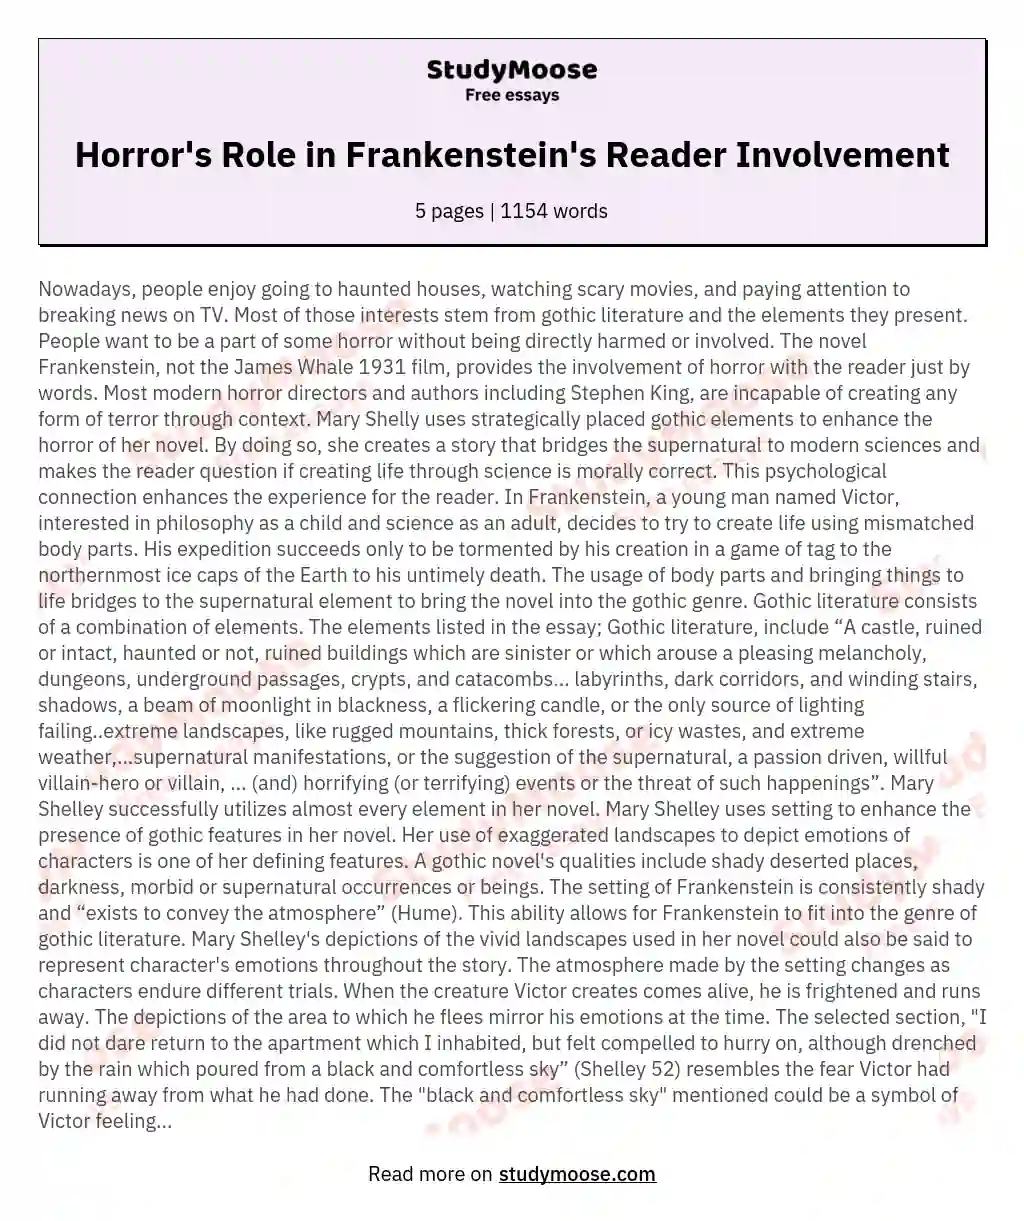 The Involvement of Horror With the Reader in the Novel Frankenstein by Mary Shelley